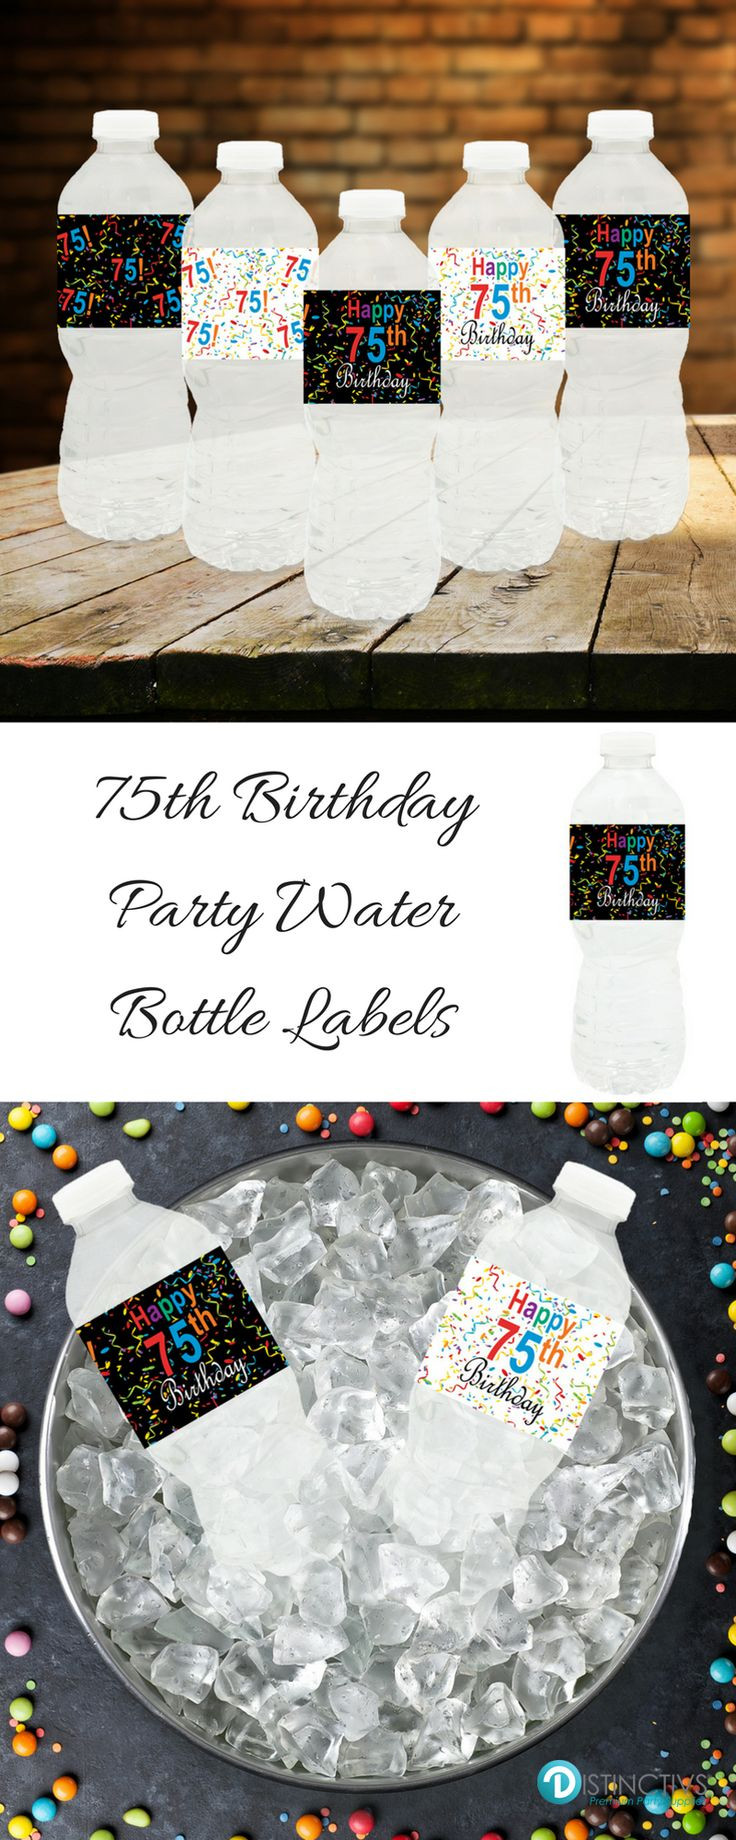 75th Birthday Party Ideas
 55 best 75th Birthday Party Ideas images on Pinterest